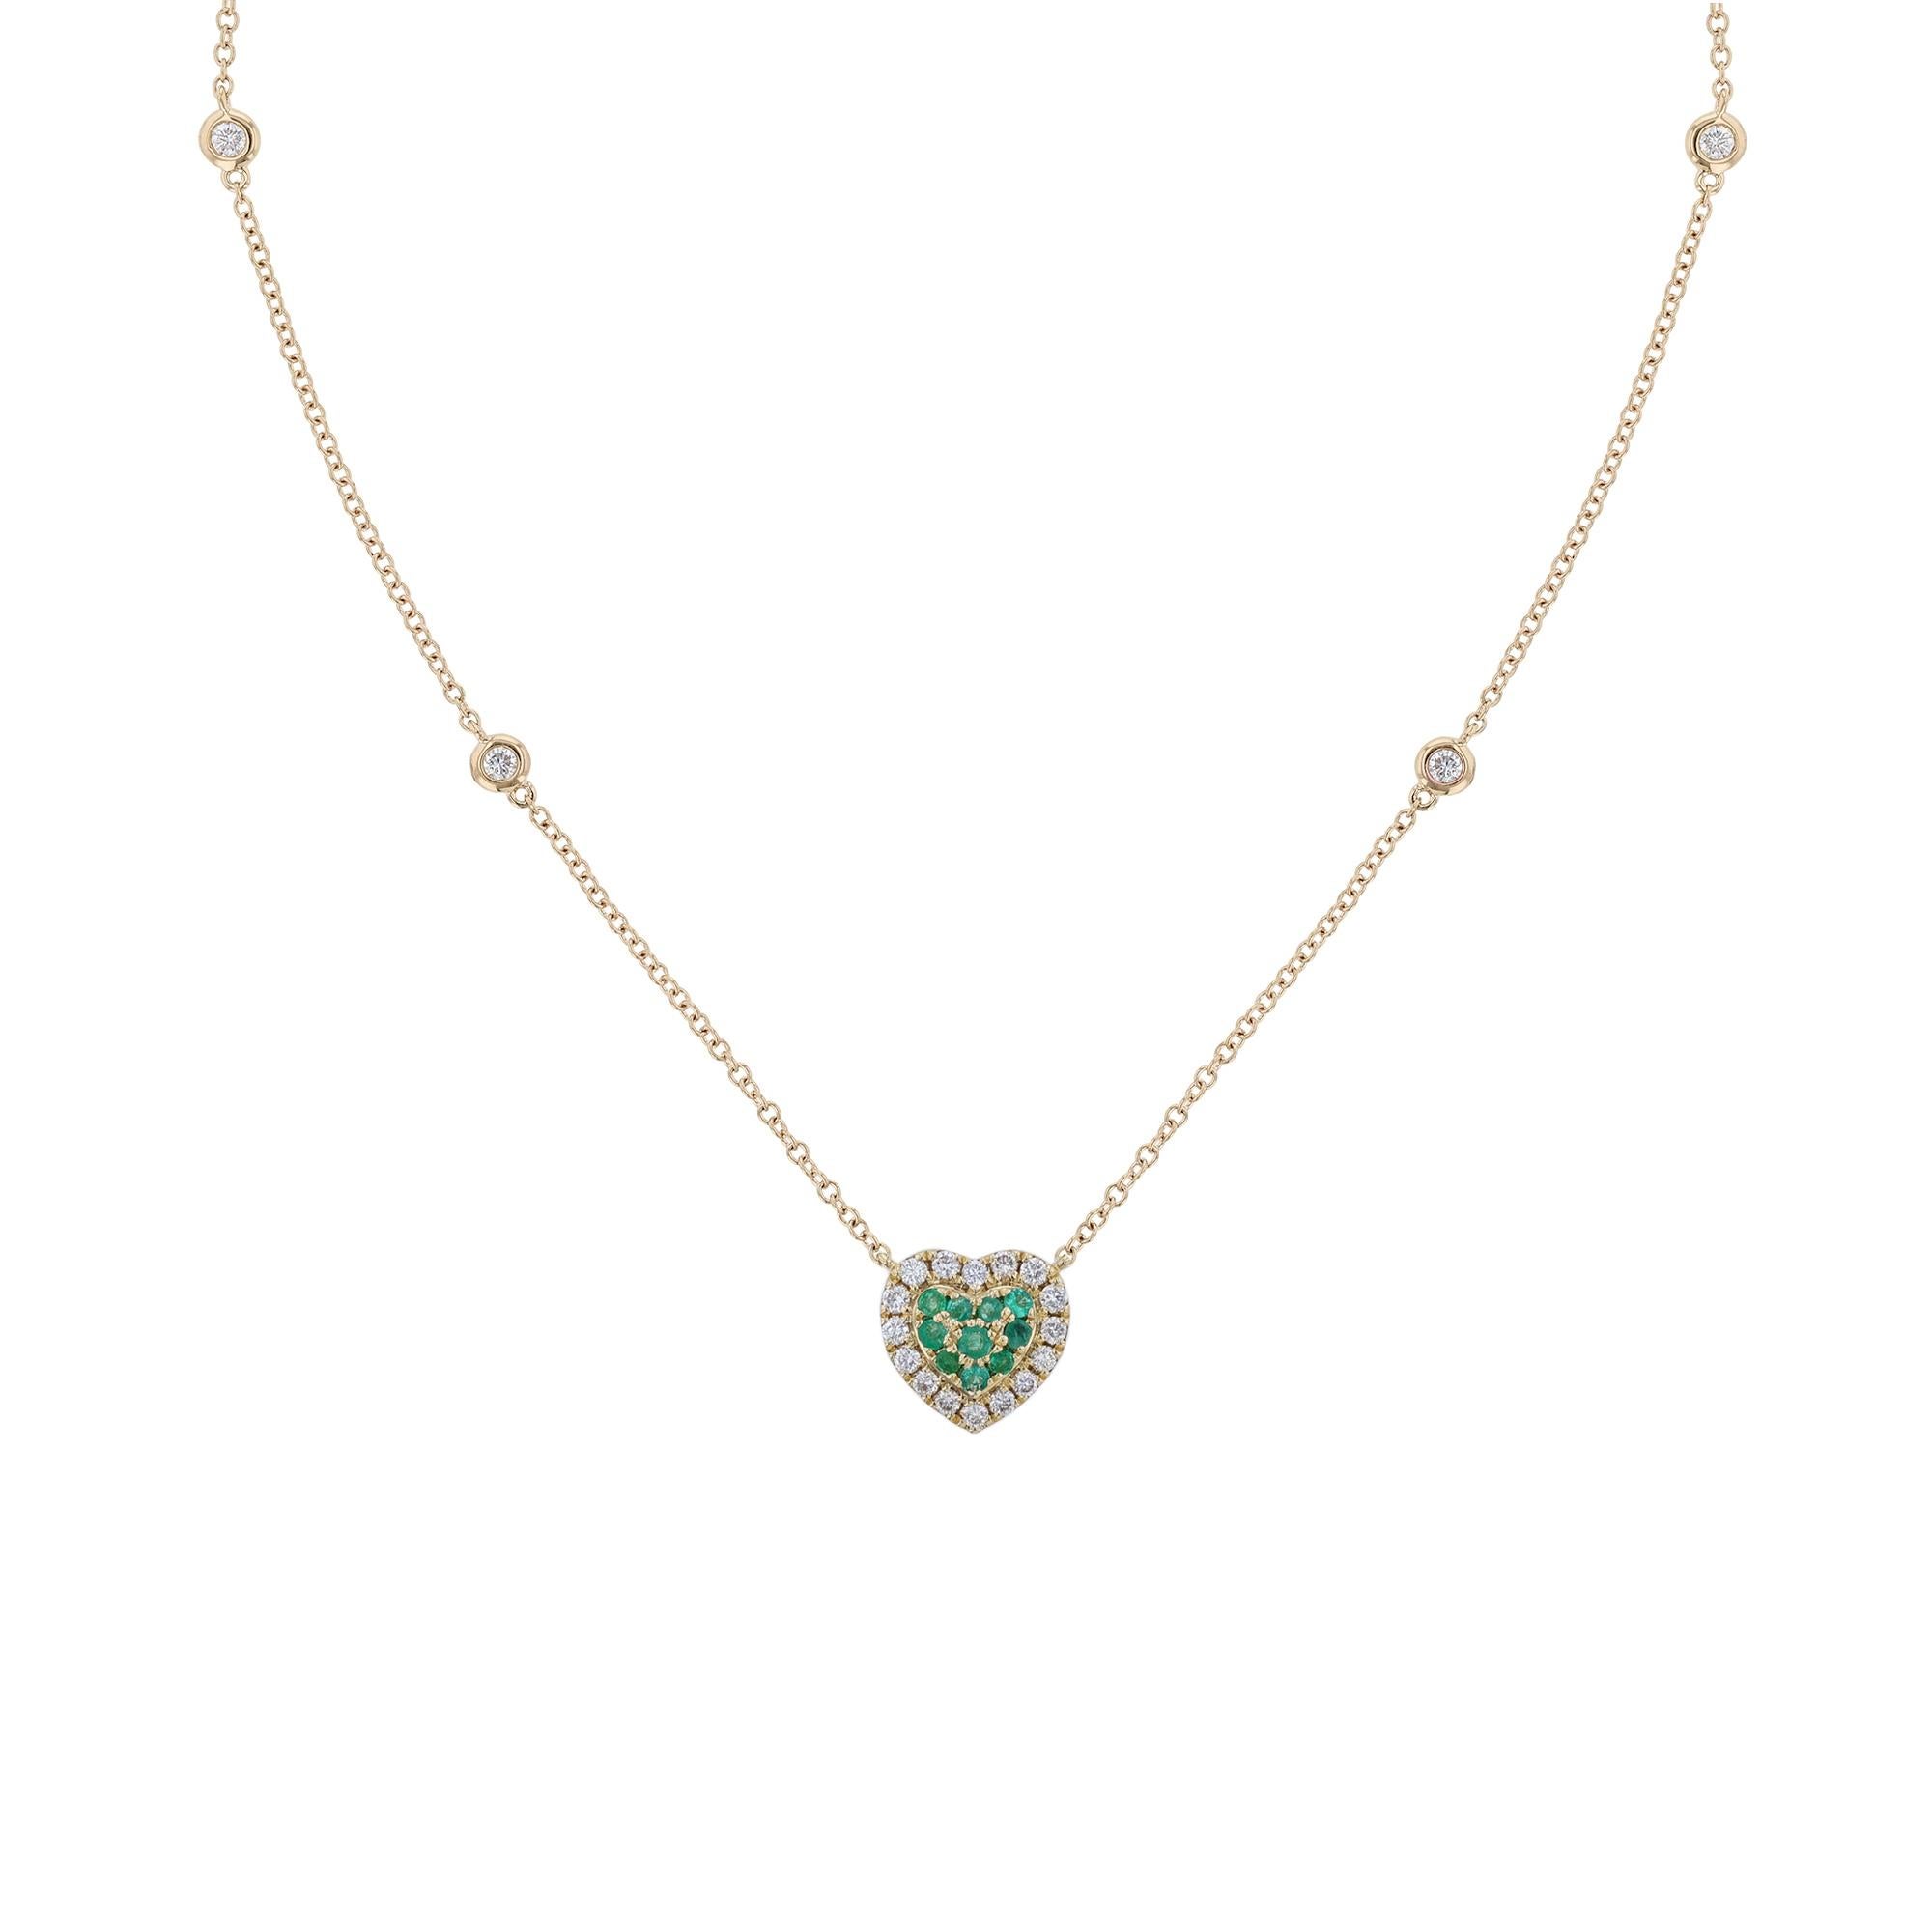 This pendant necklace is made in 18K yellow gold. It features a heart shape pendant with 10 round cut, pave' set emeralds. Surrounded by a halo of 15 pave' set, round cut diamonds. With 4 round cut, bezel diamond stations on the chain. The necklace